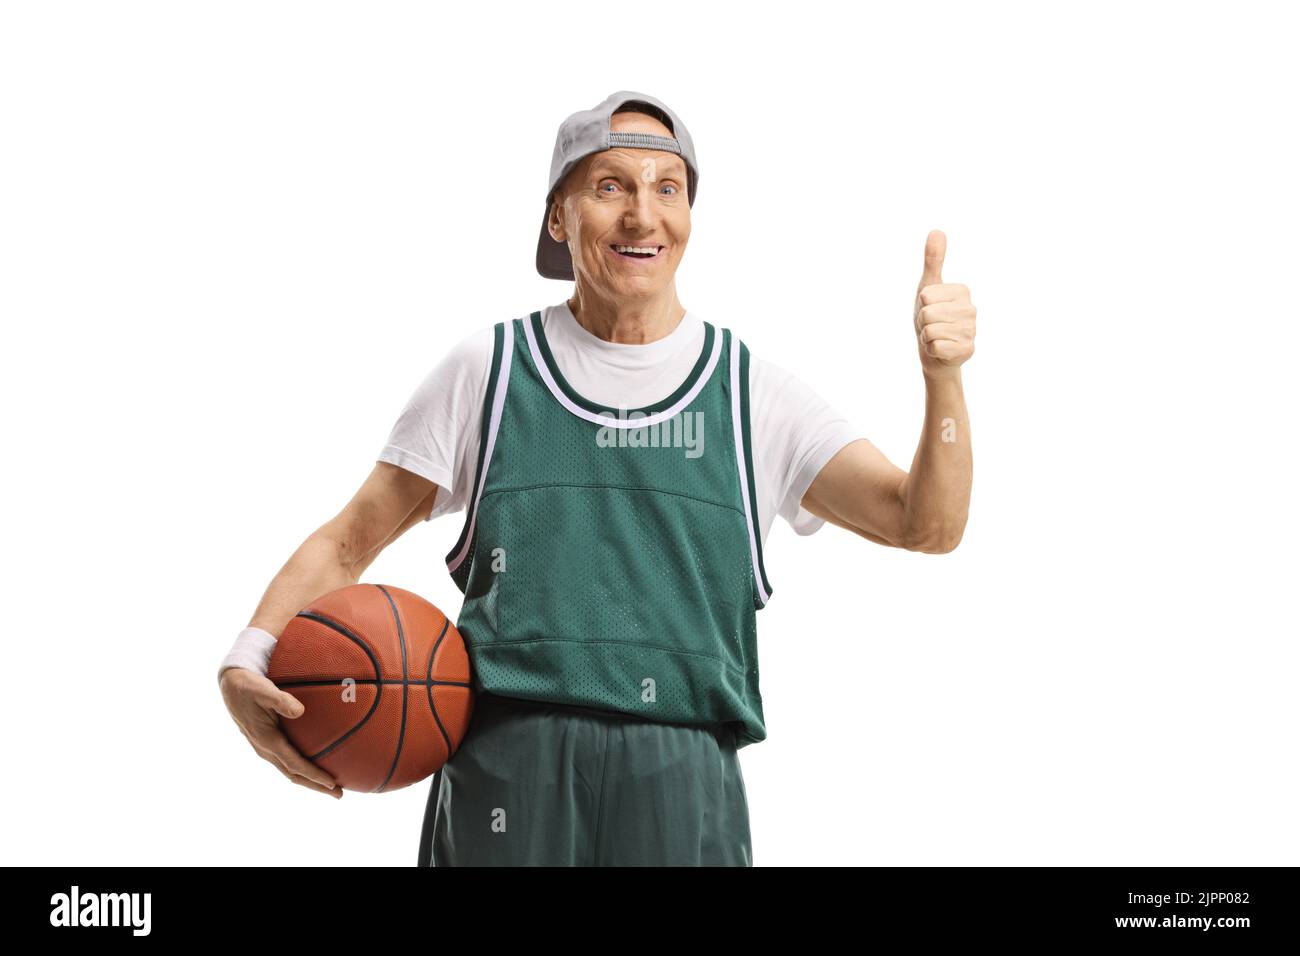 Elderly man in a green jersey holding a basketball and showing thumbs up isolated on white background Stock Photo